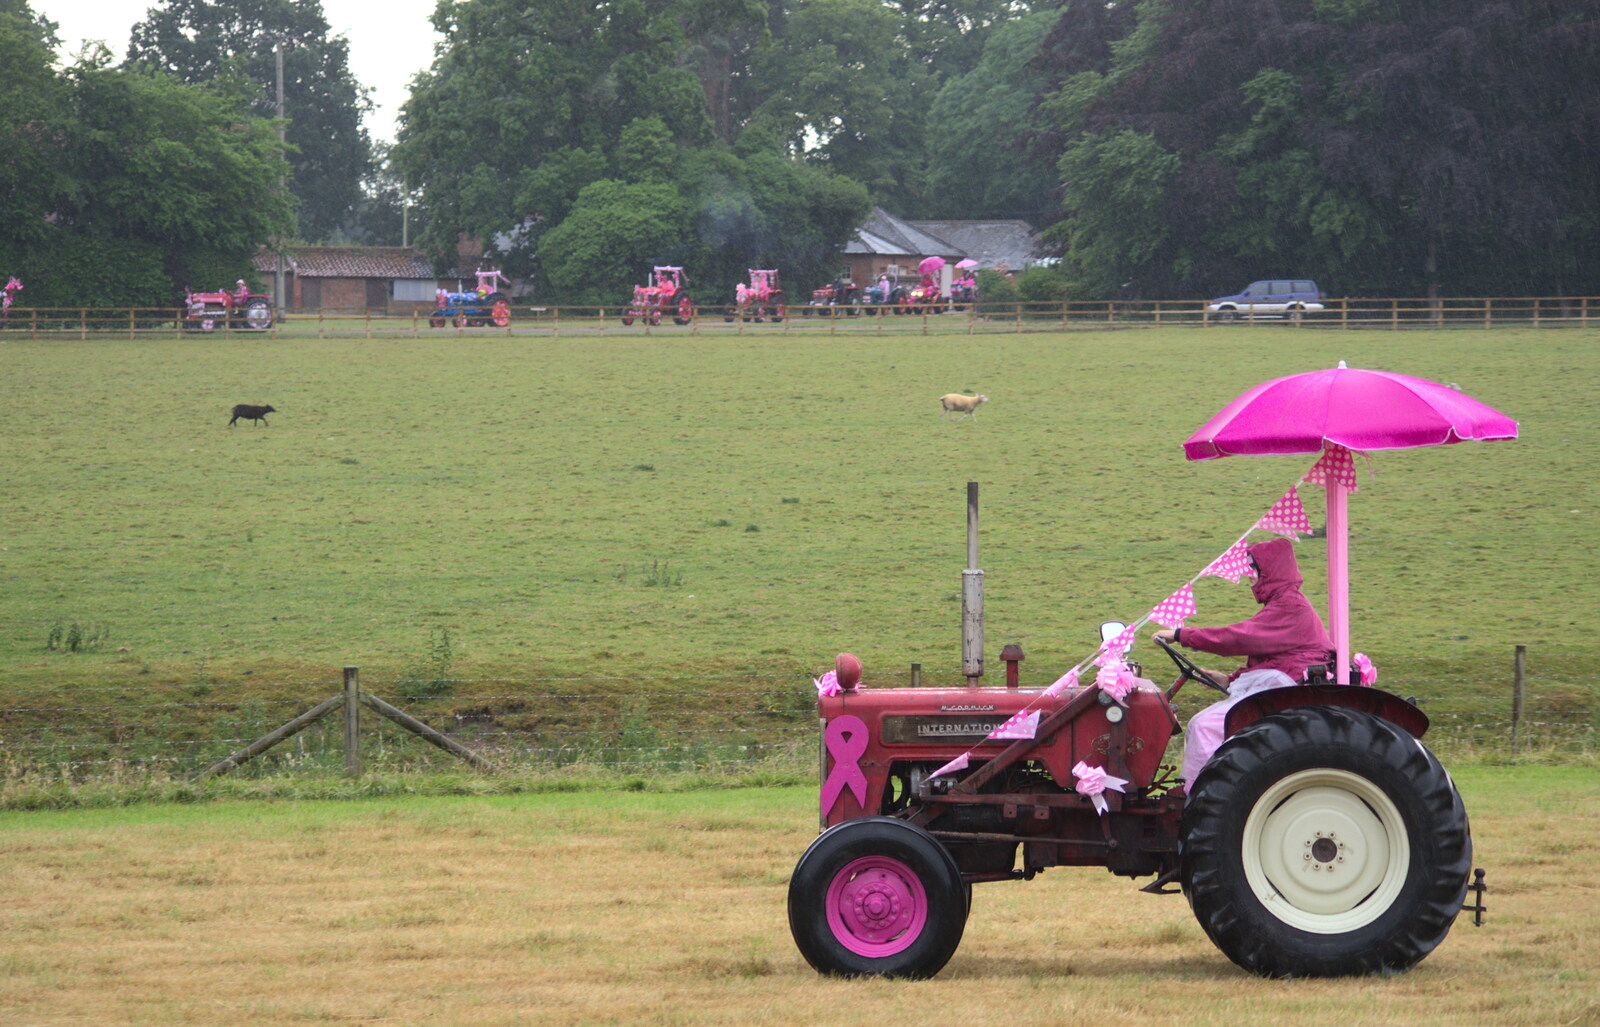 A stream of tractors comes in to the park from The Pink Ladies Tractor Run, Harleston and Gawdy Park, Norfolk - 5th July 2015